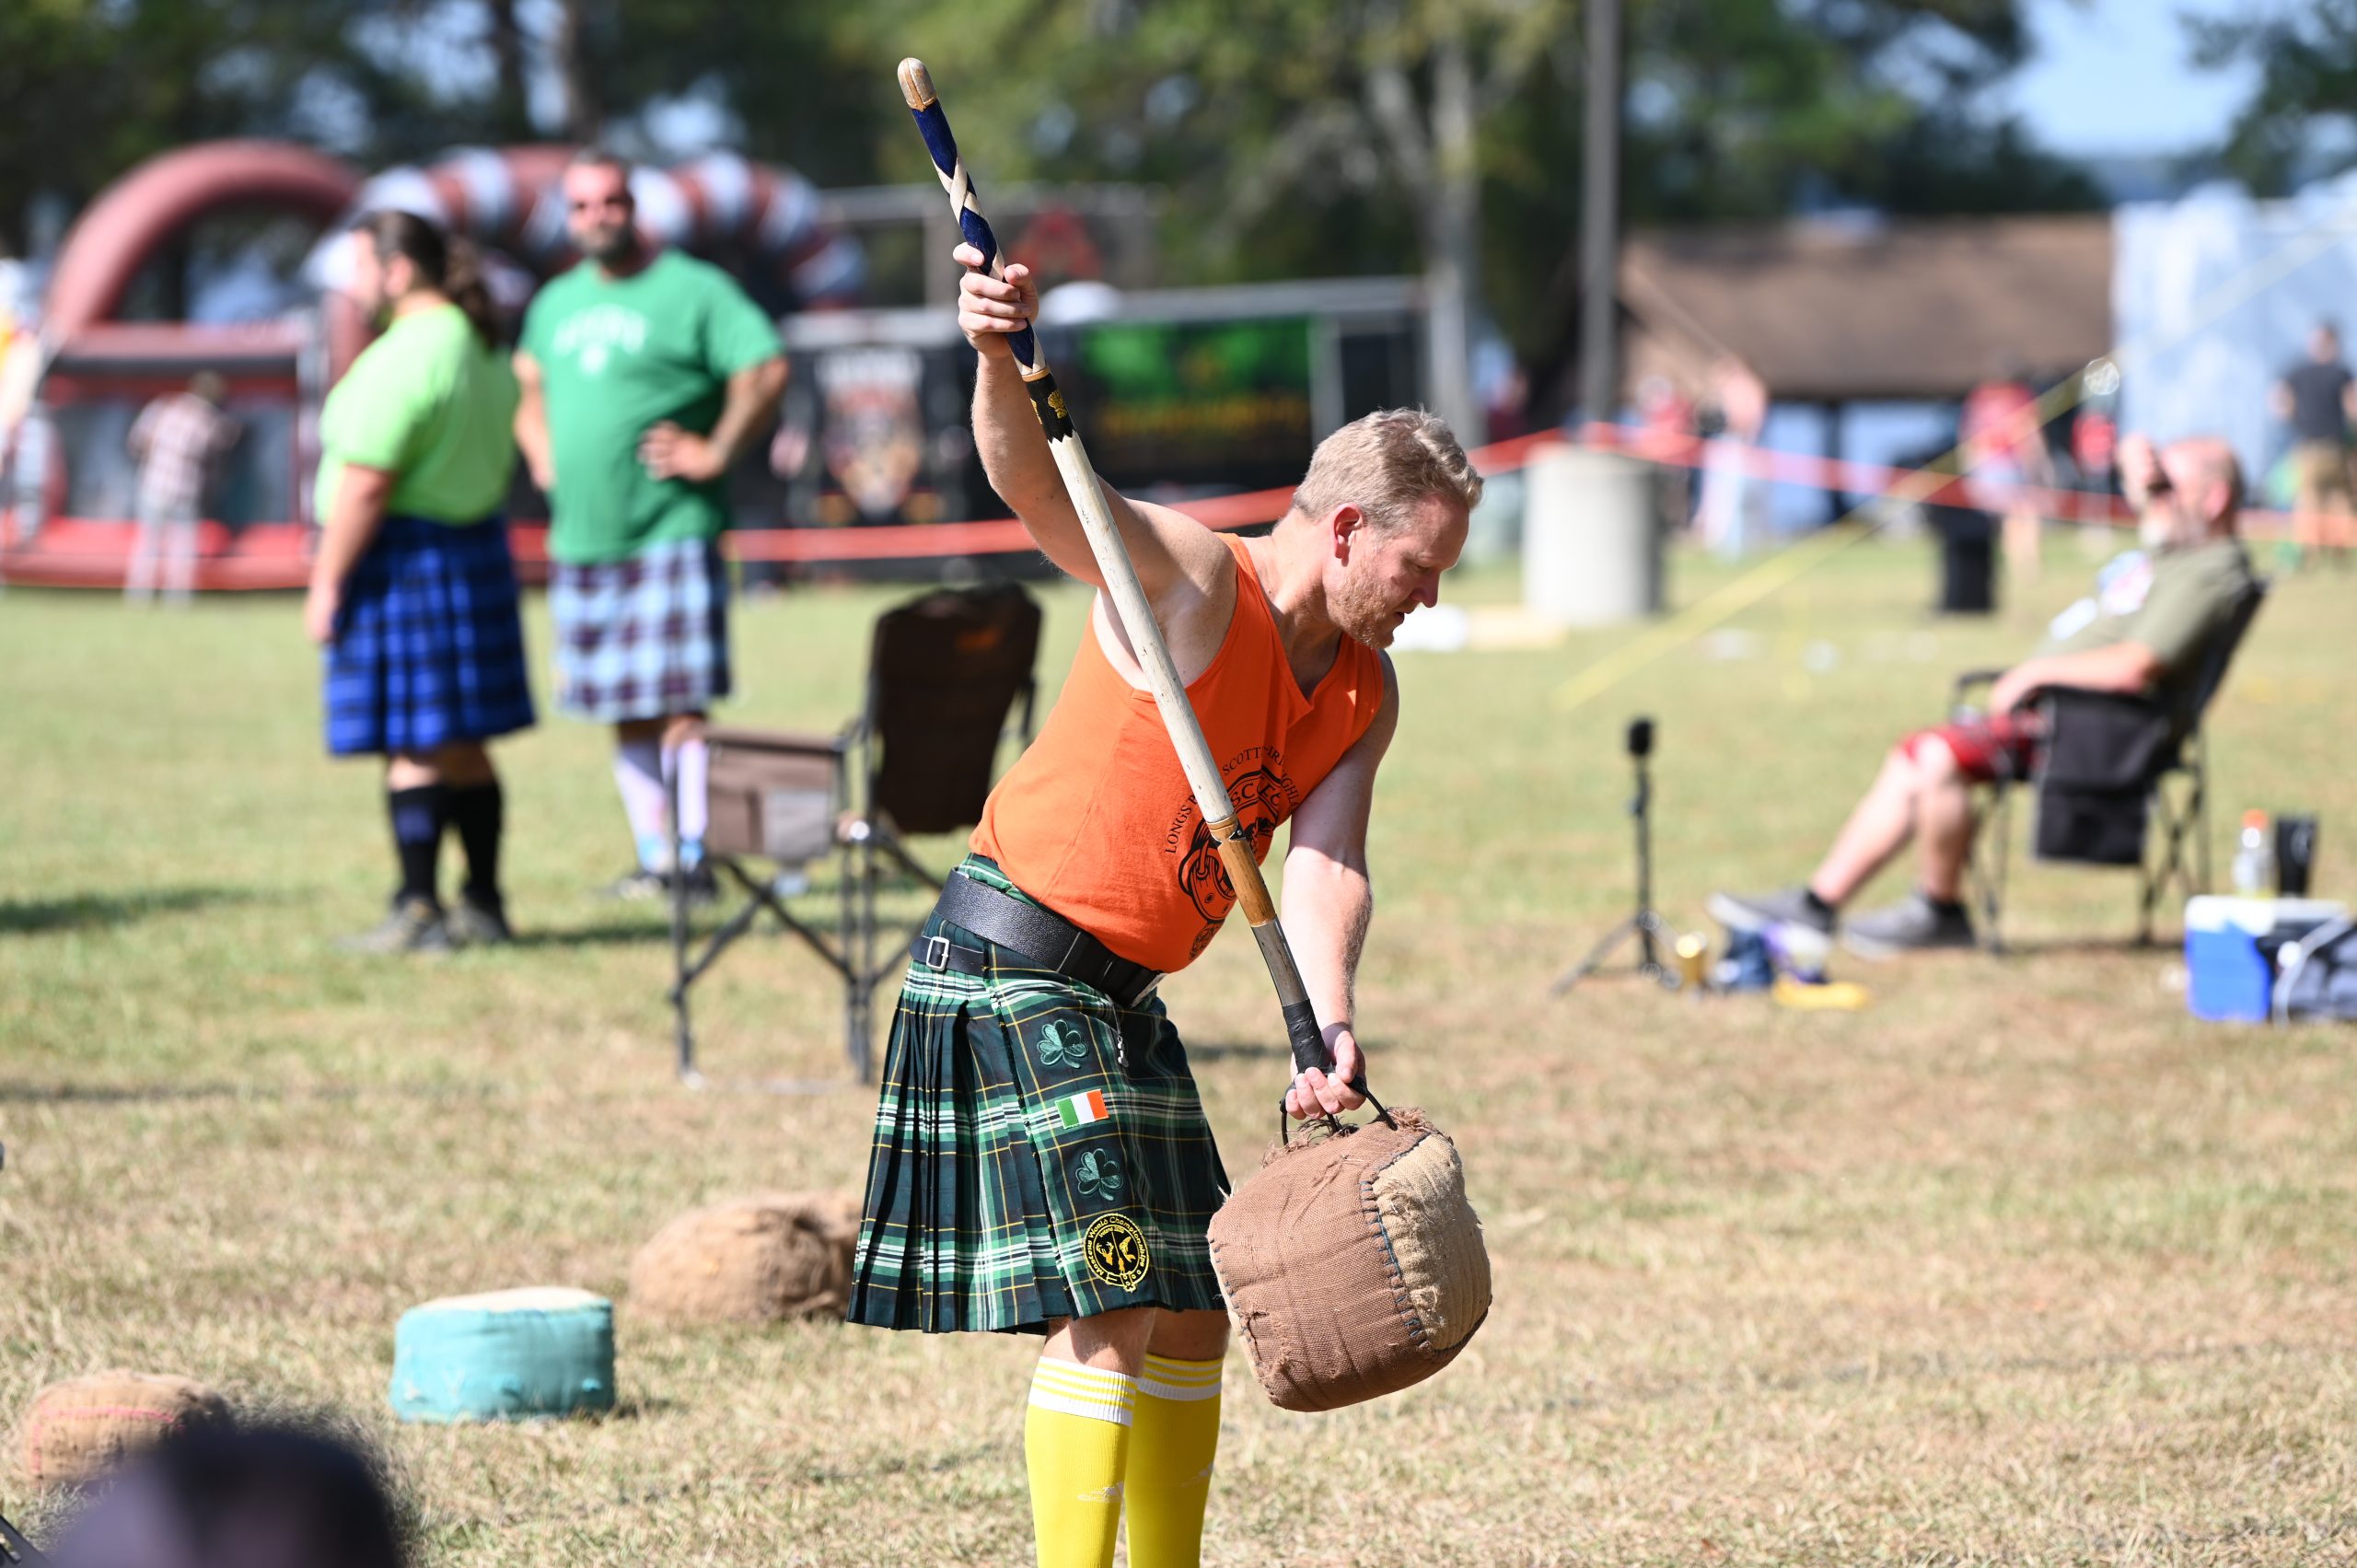 Fáilte! Welcome to CelticFest Mississippi! – 2022 at Lakeshore Park on ...